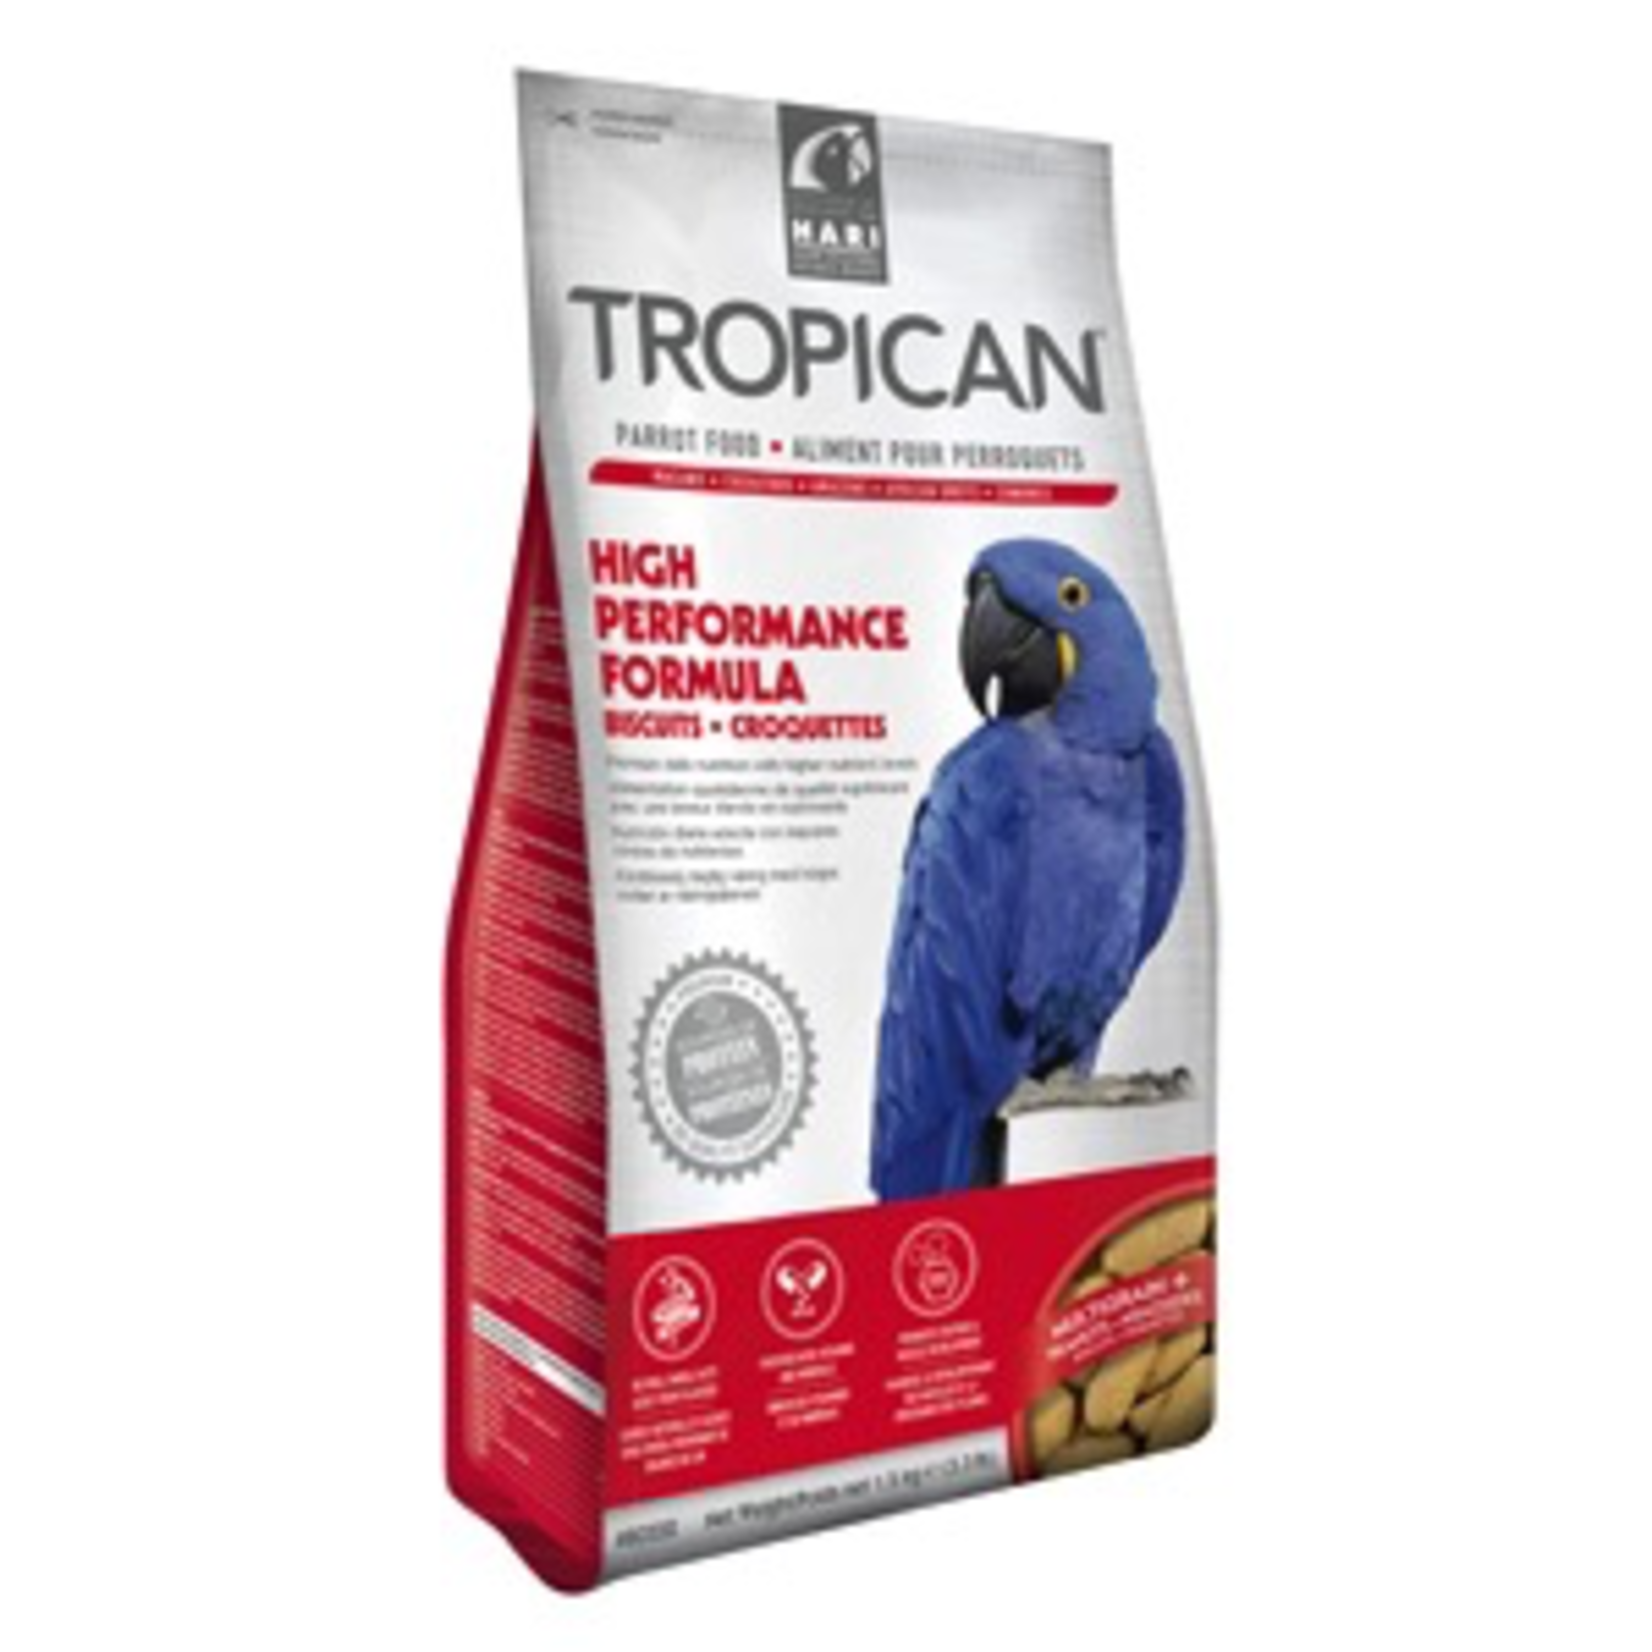 TROPICAN (W) Tropican High Performance Biscuits for Parrots - 1.5 kg (3.3 lb)